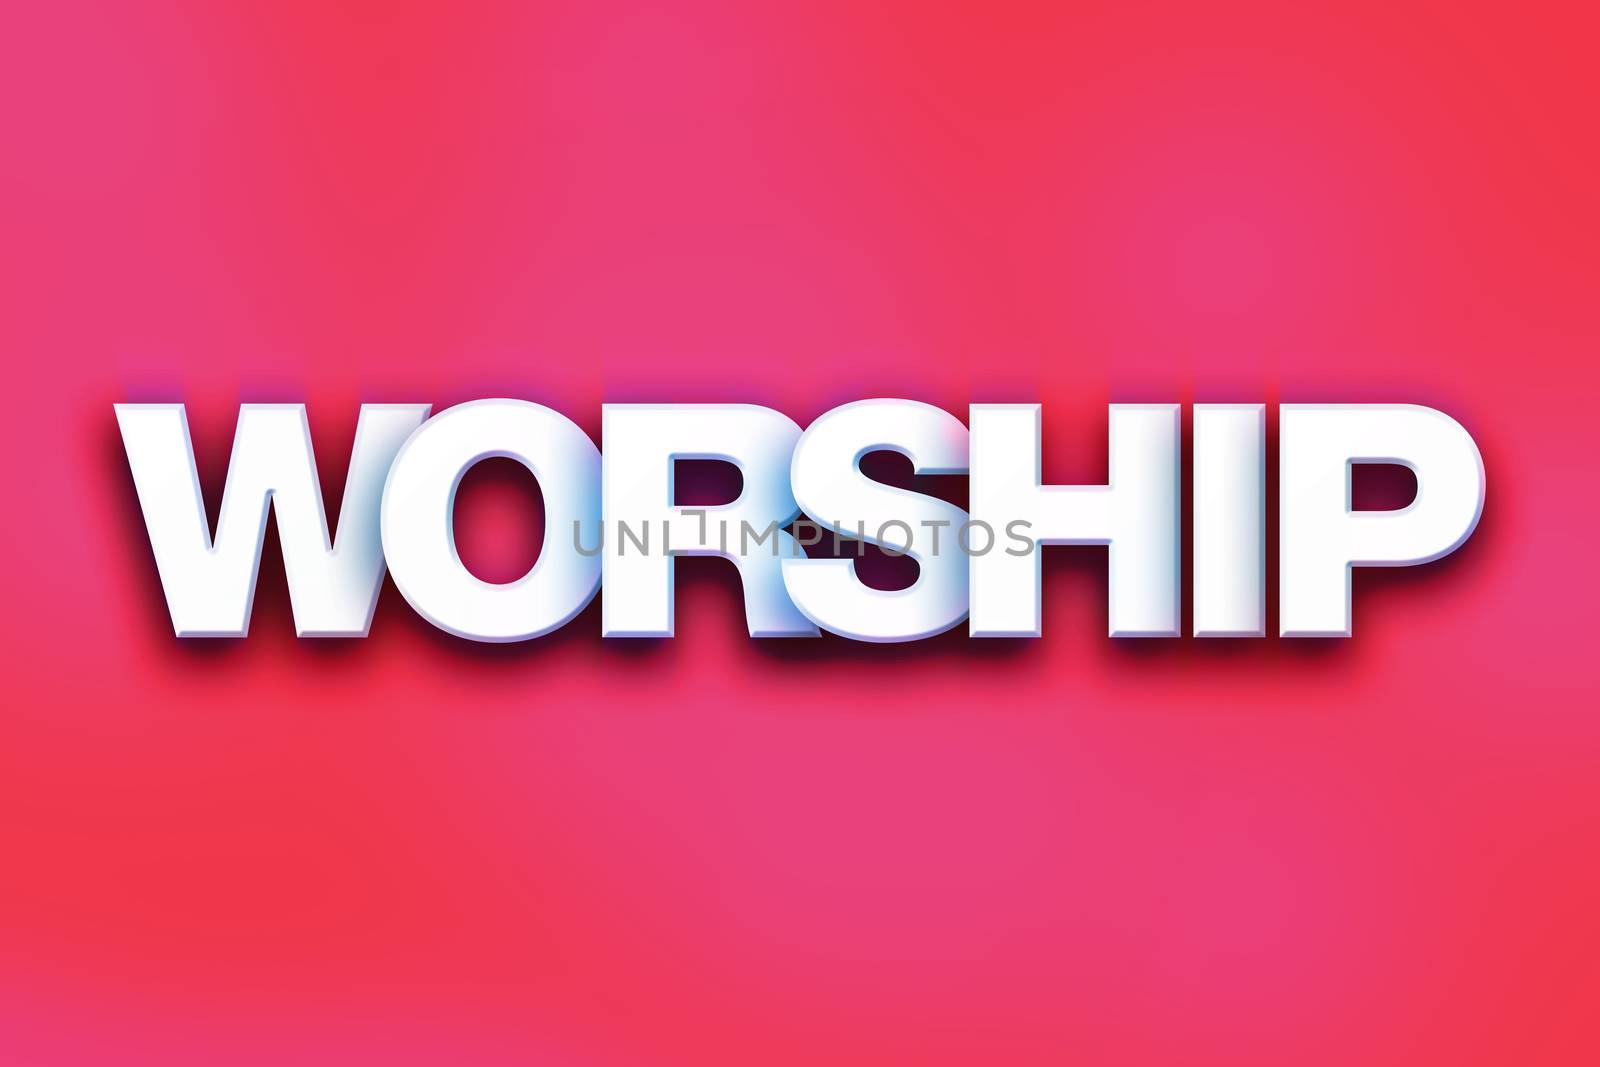 The word "Worship" written in white 3D letters on a colorful background concept and theme.